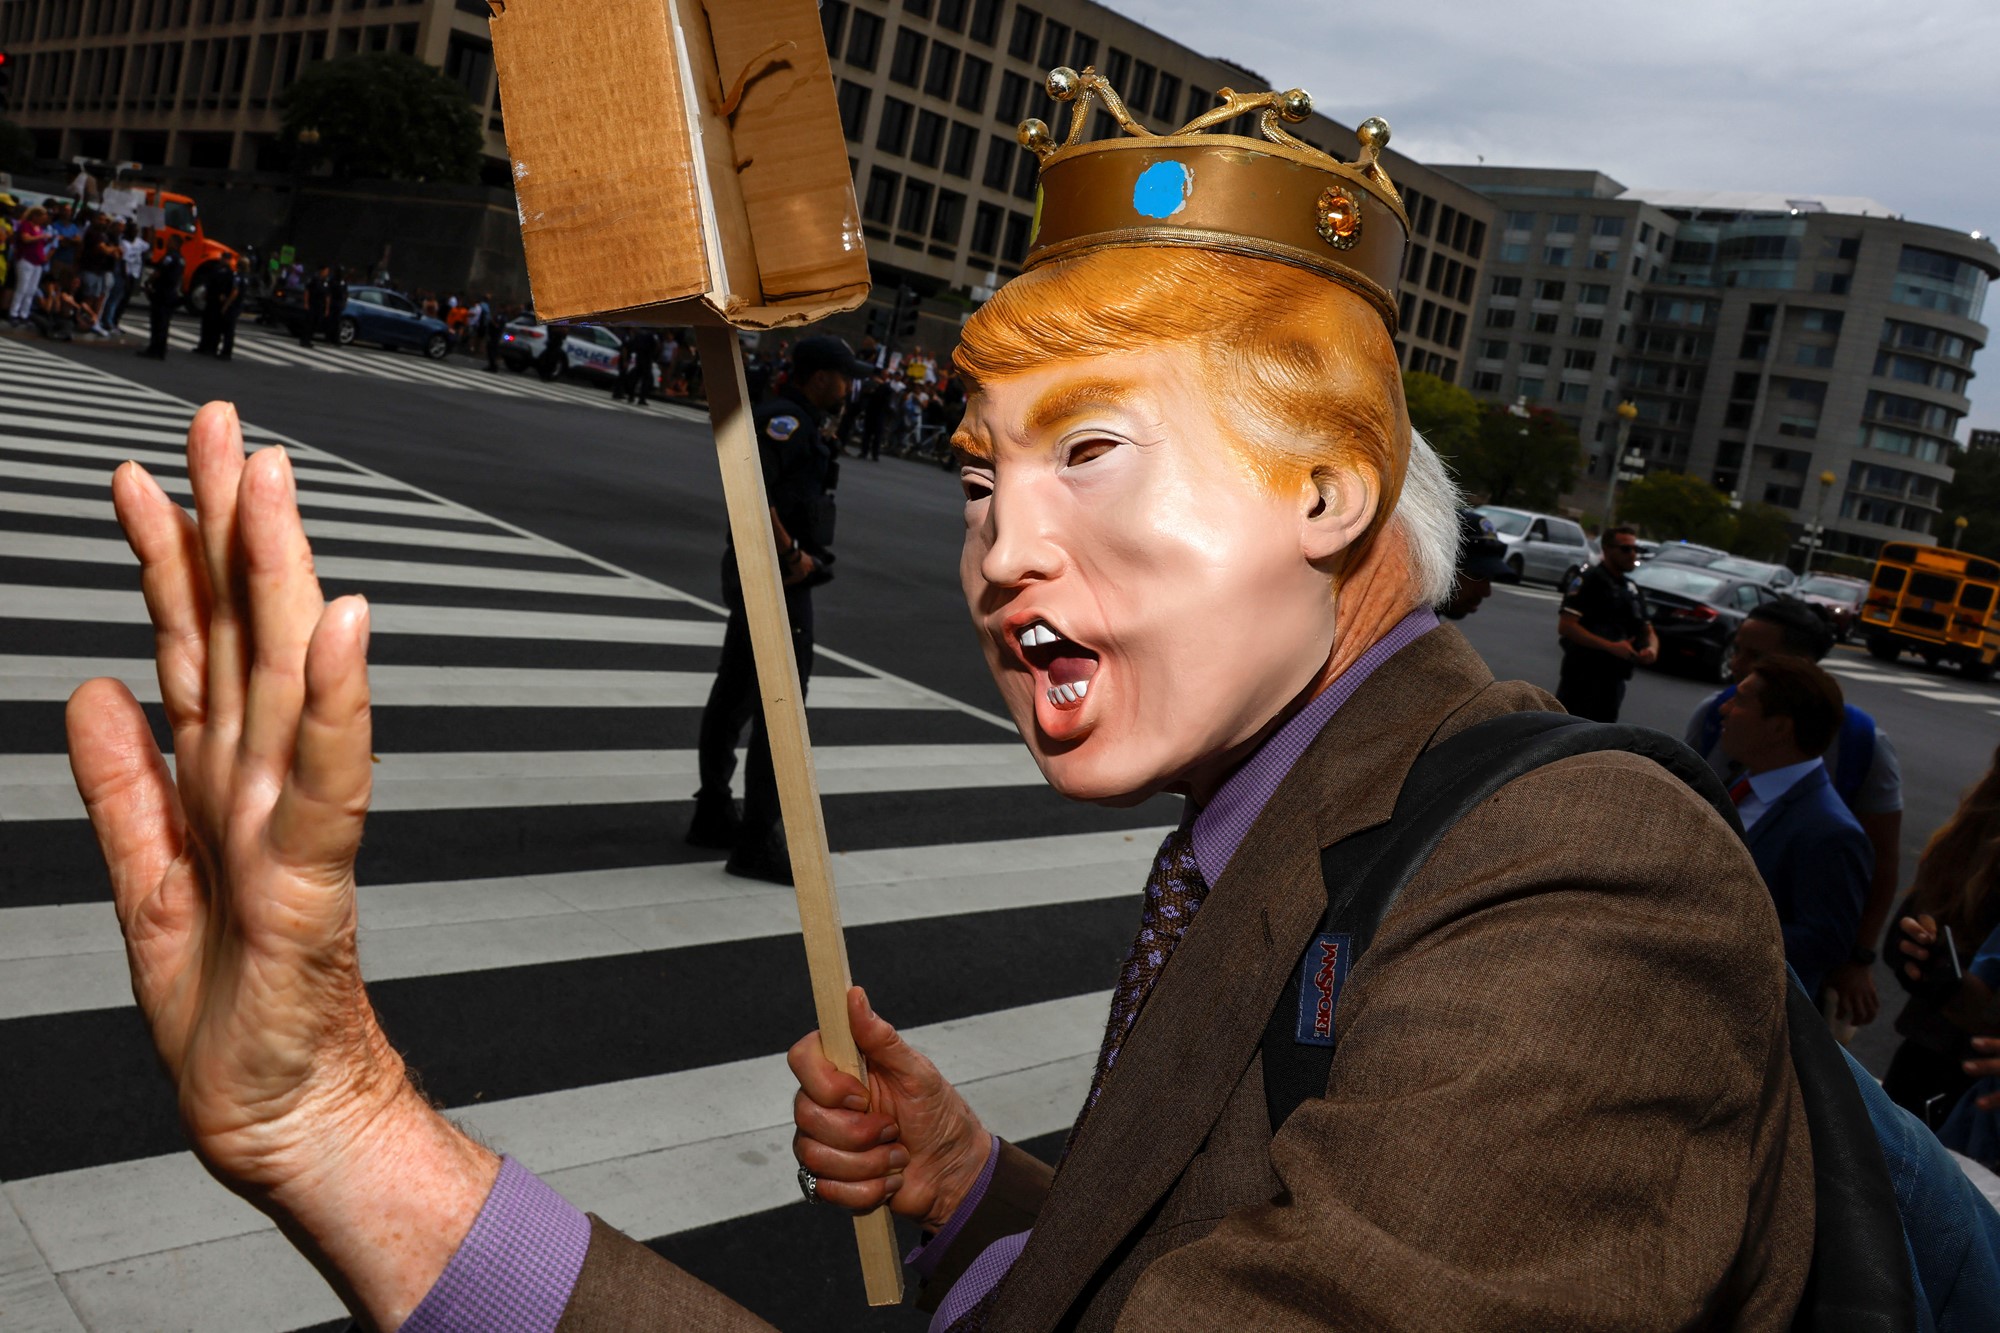 A demonstrator gestures on the day former U.S. President Donald Trump, who is facing federal charges related to attempts to overturn his 2020 election defeat, appears at the U.S. District Court in Washington, U.S.